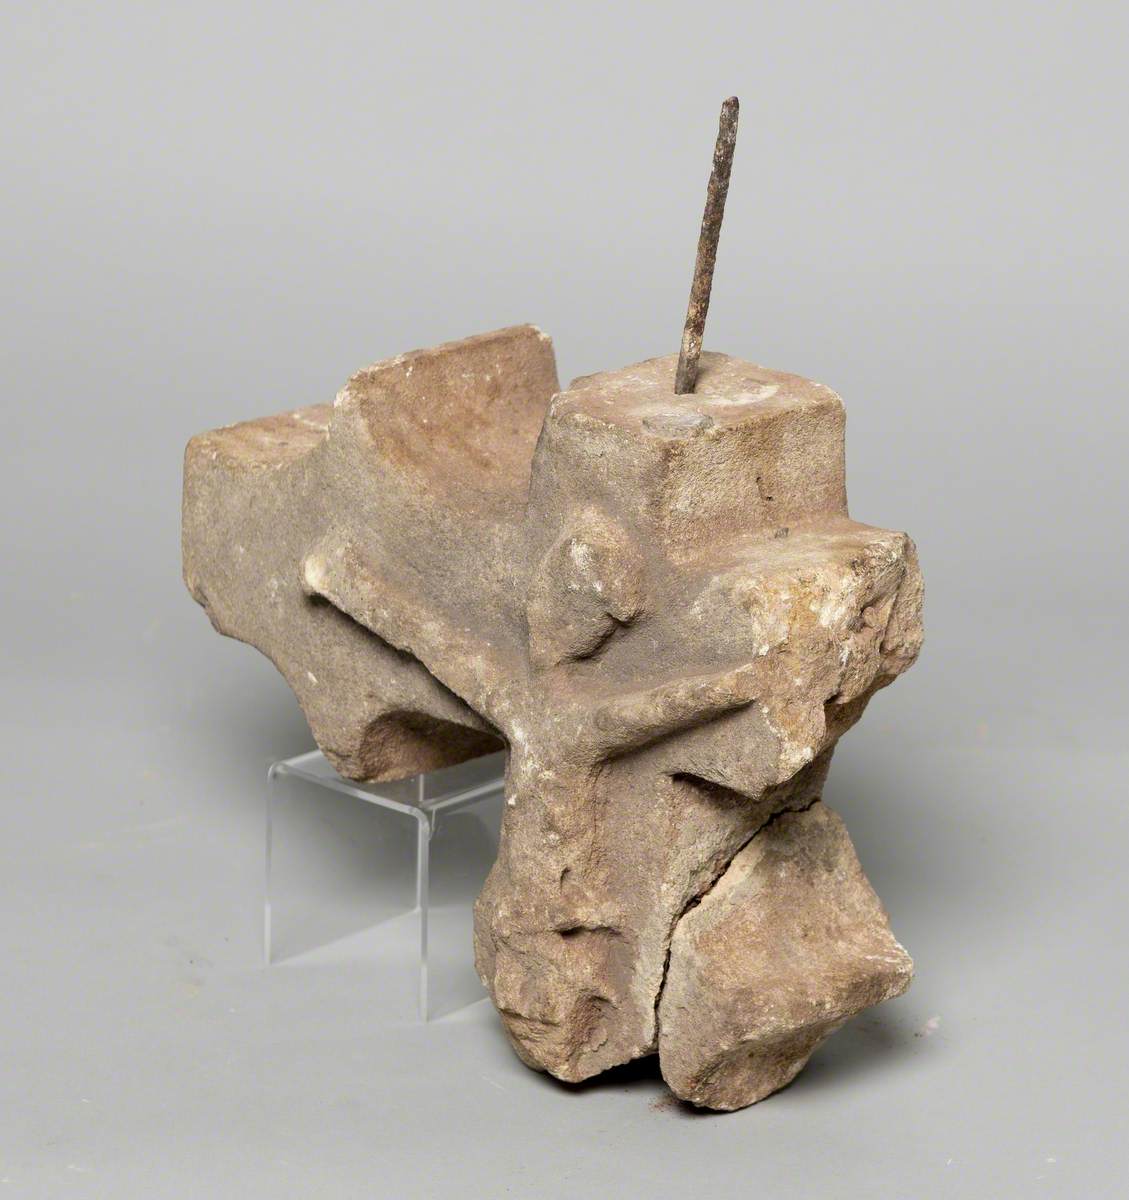 Part of a Stone Cross Featuring the Crucifixion